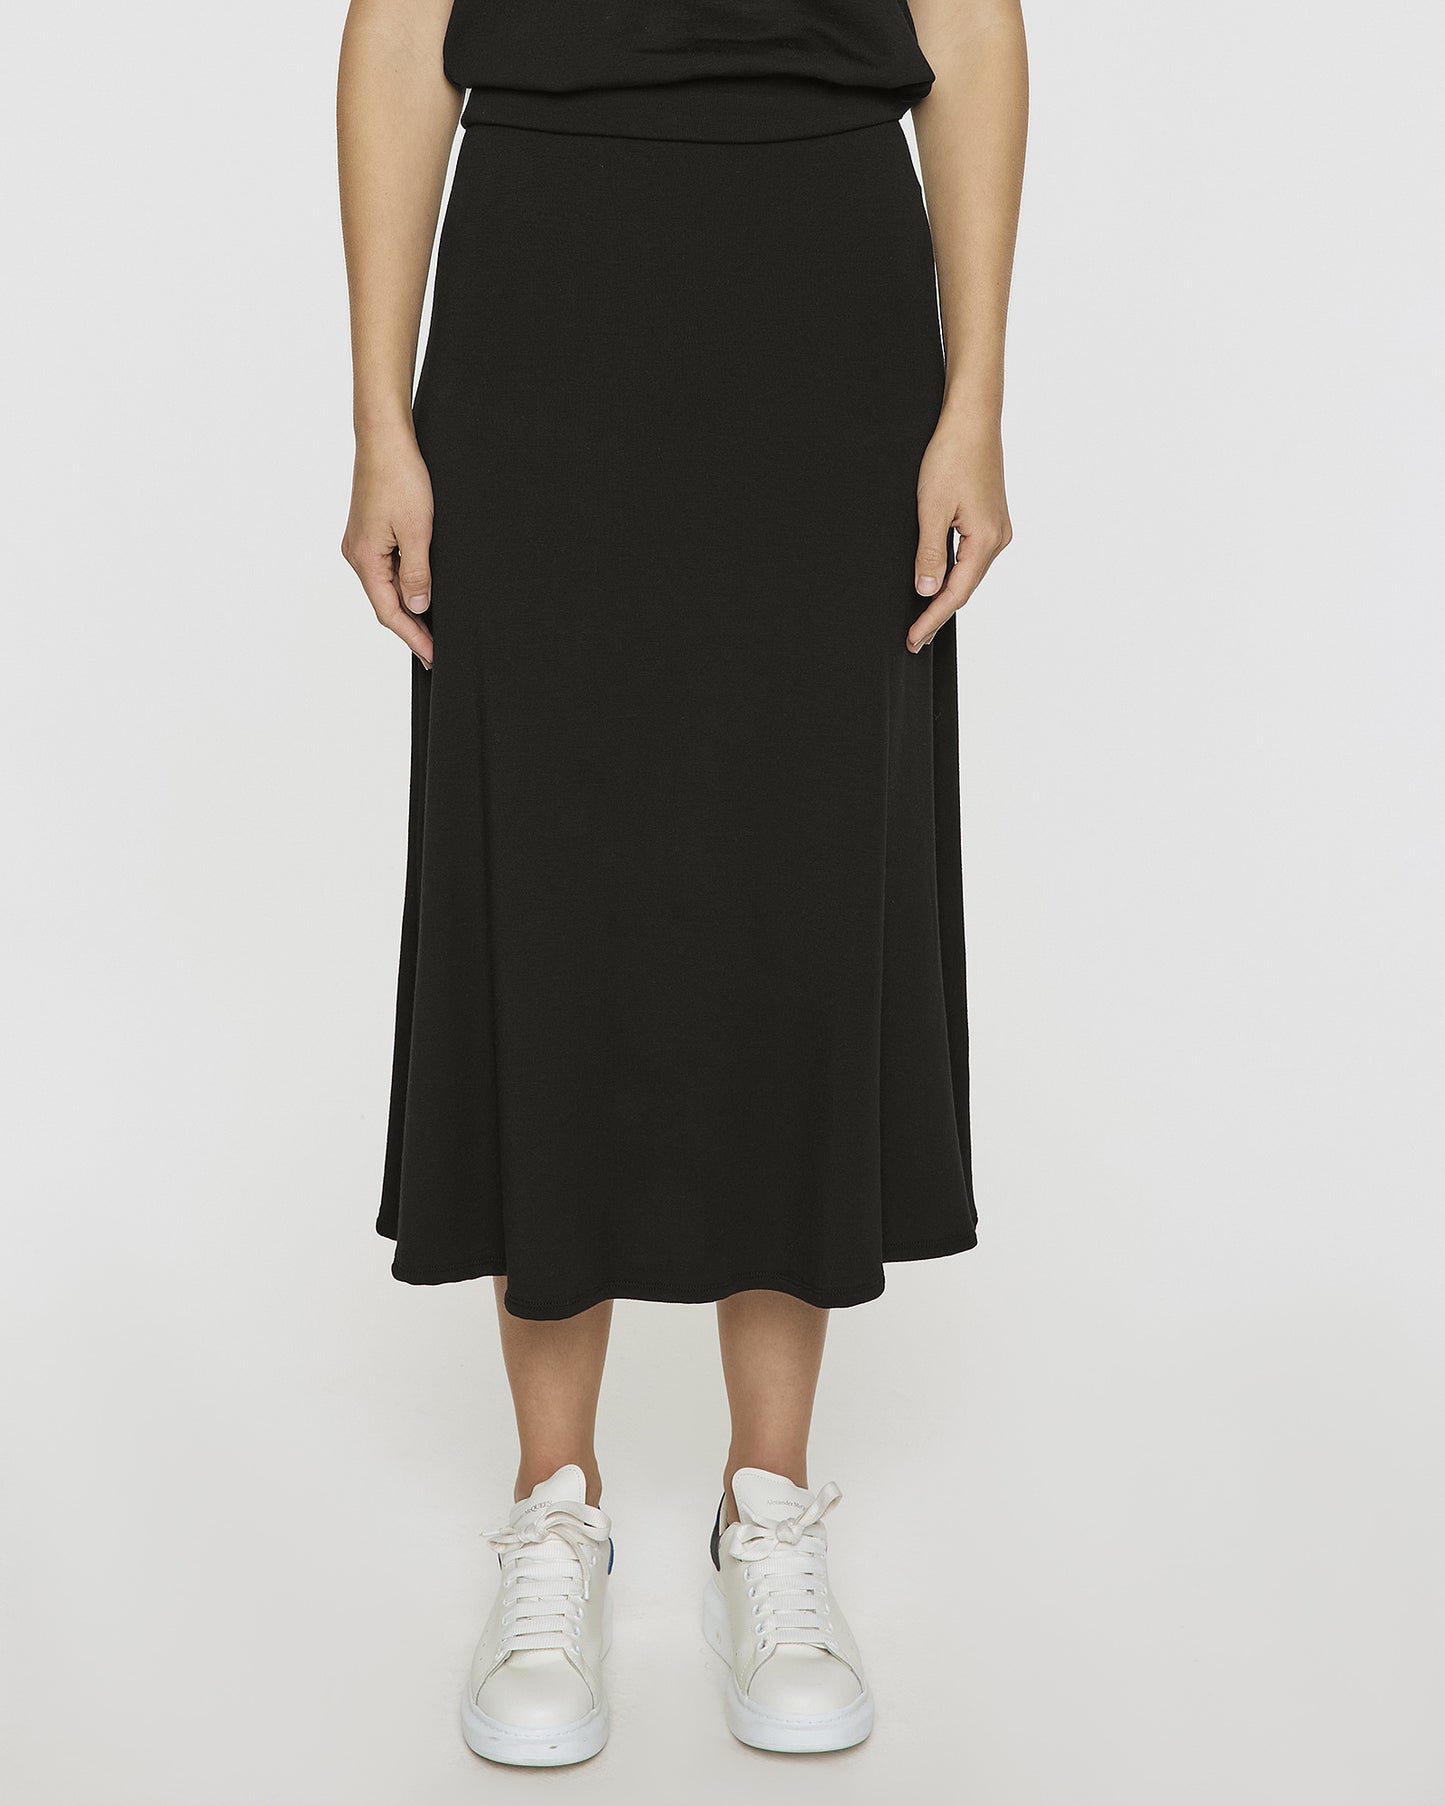 Coco | The A-Line Skirt